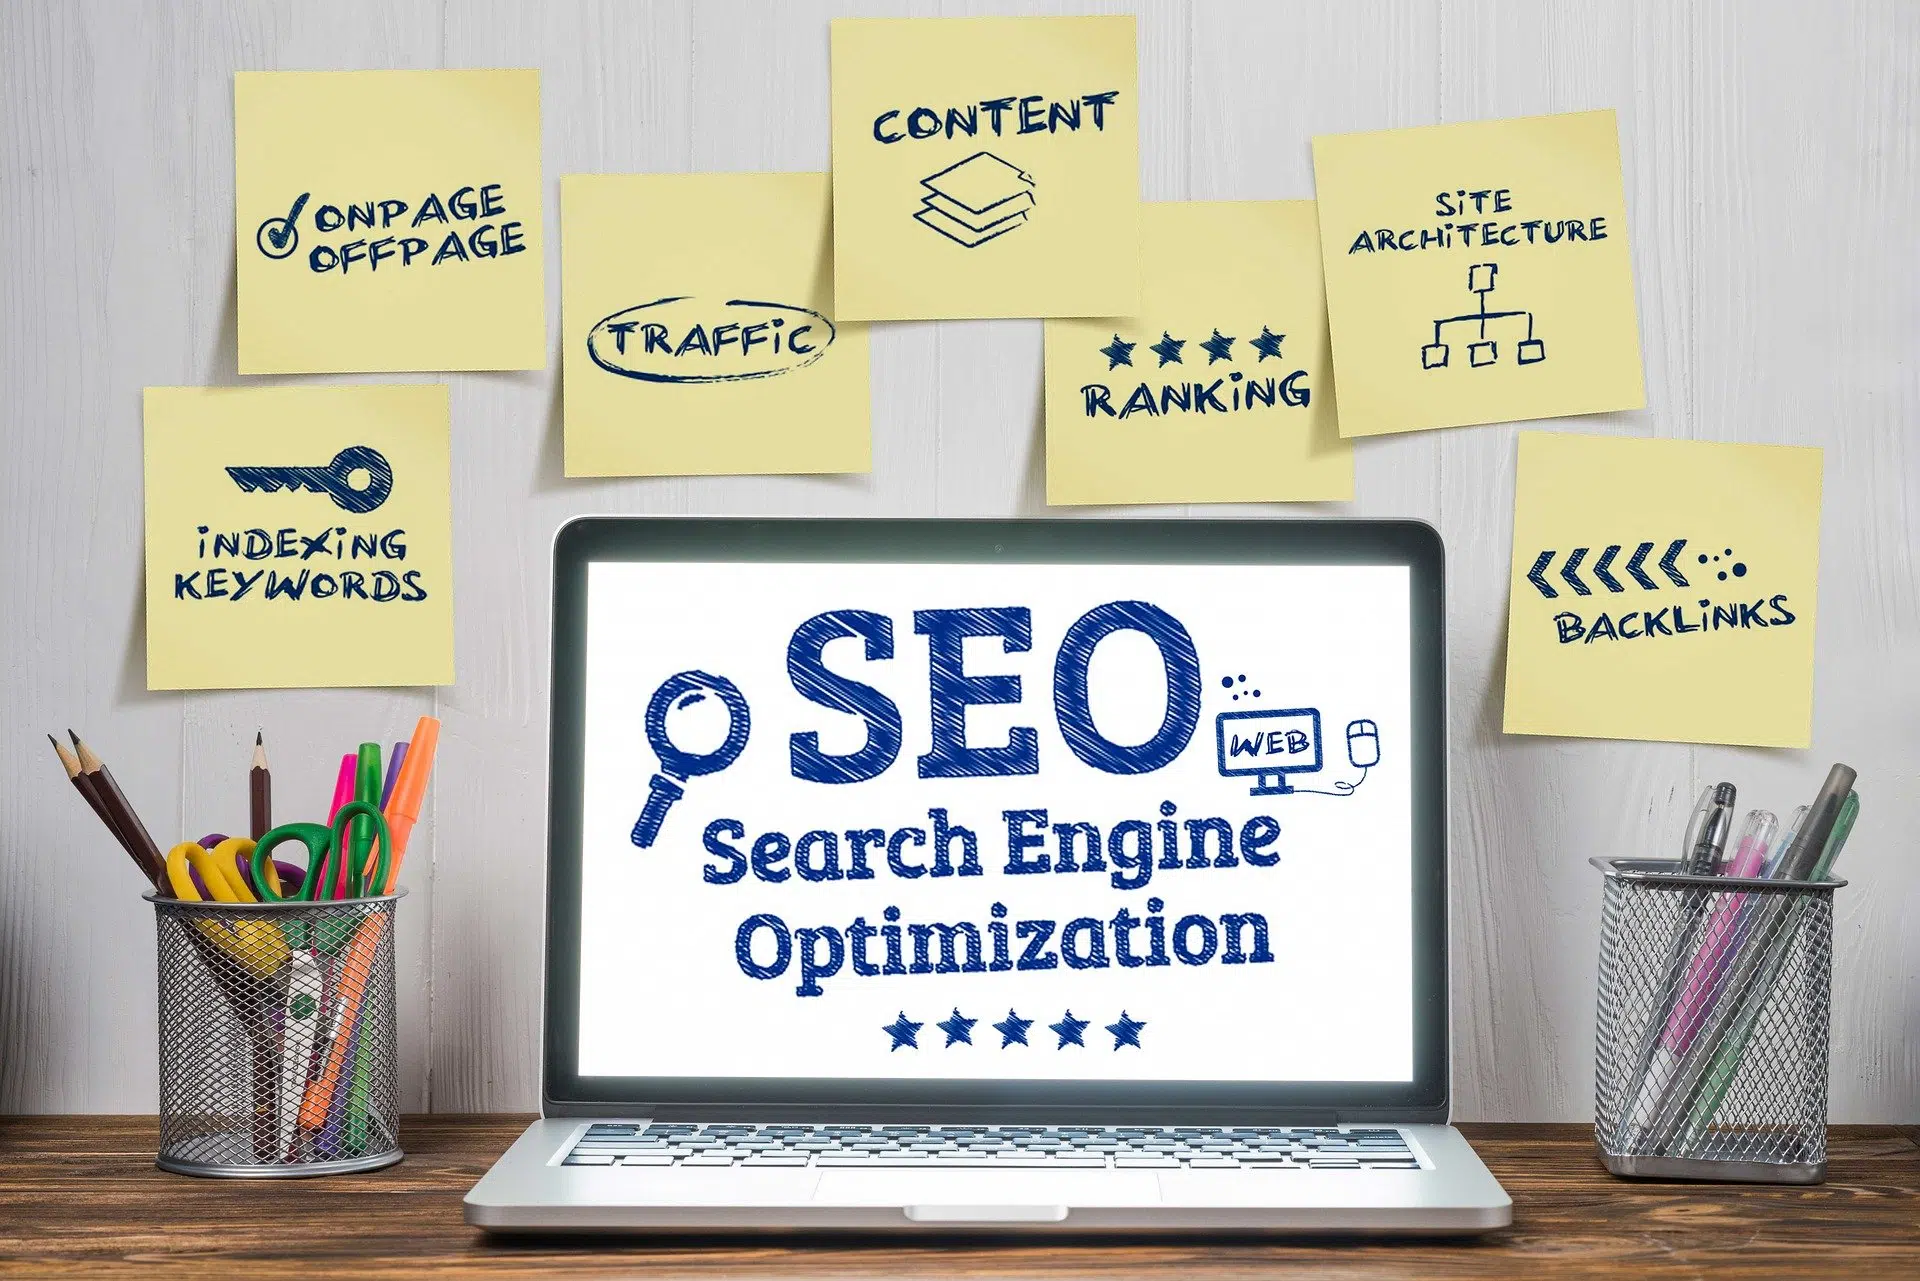 Reasons why a blog will help improve SEO performance